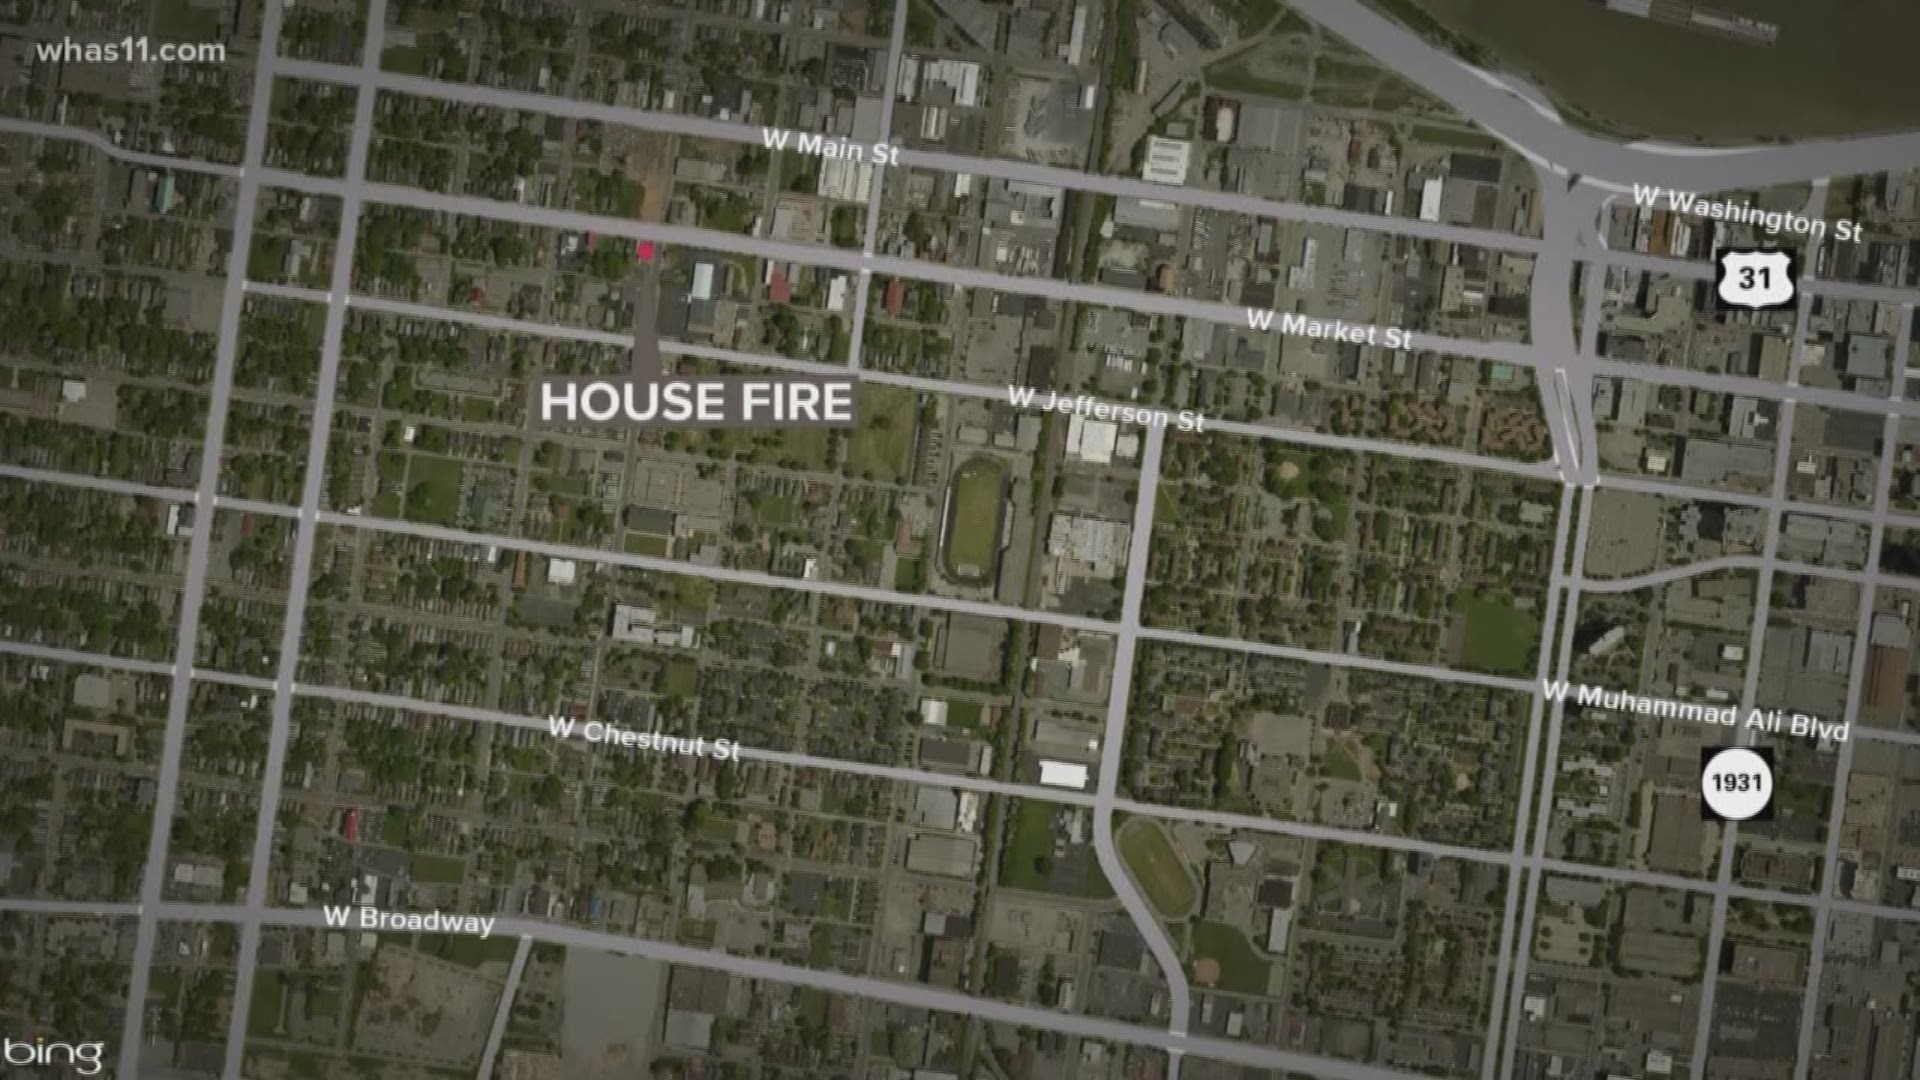 Fire damages structure in Russell neighborhood